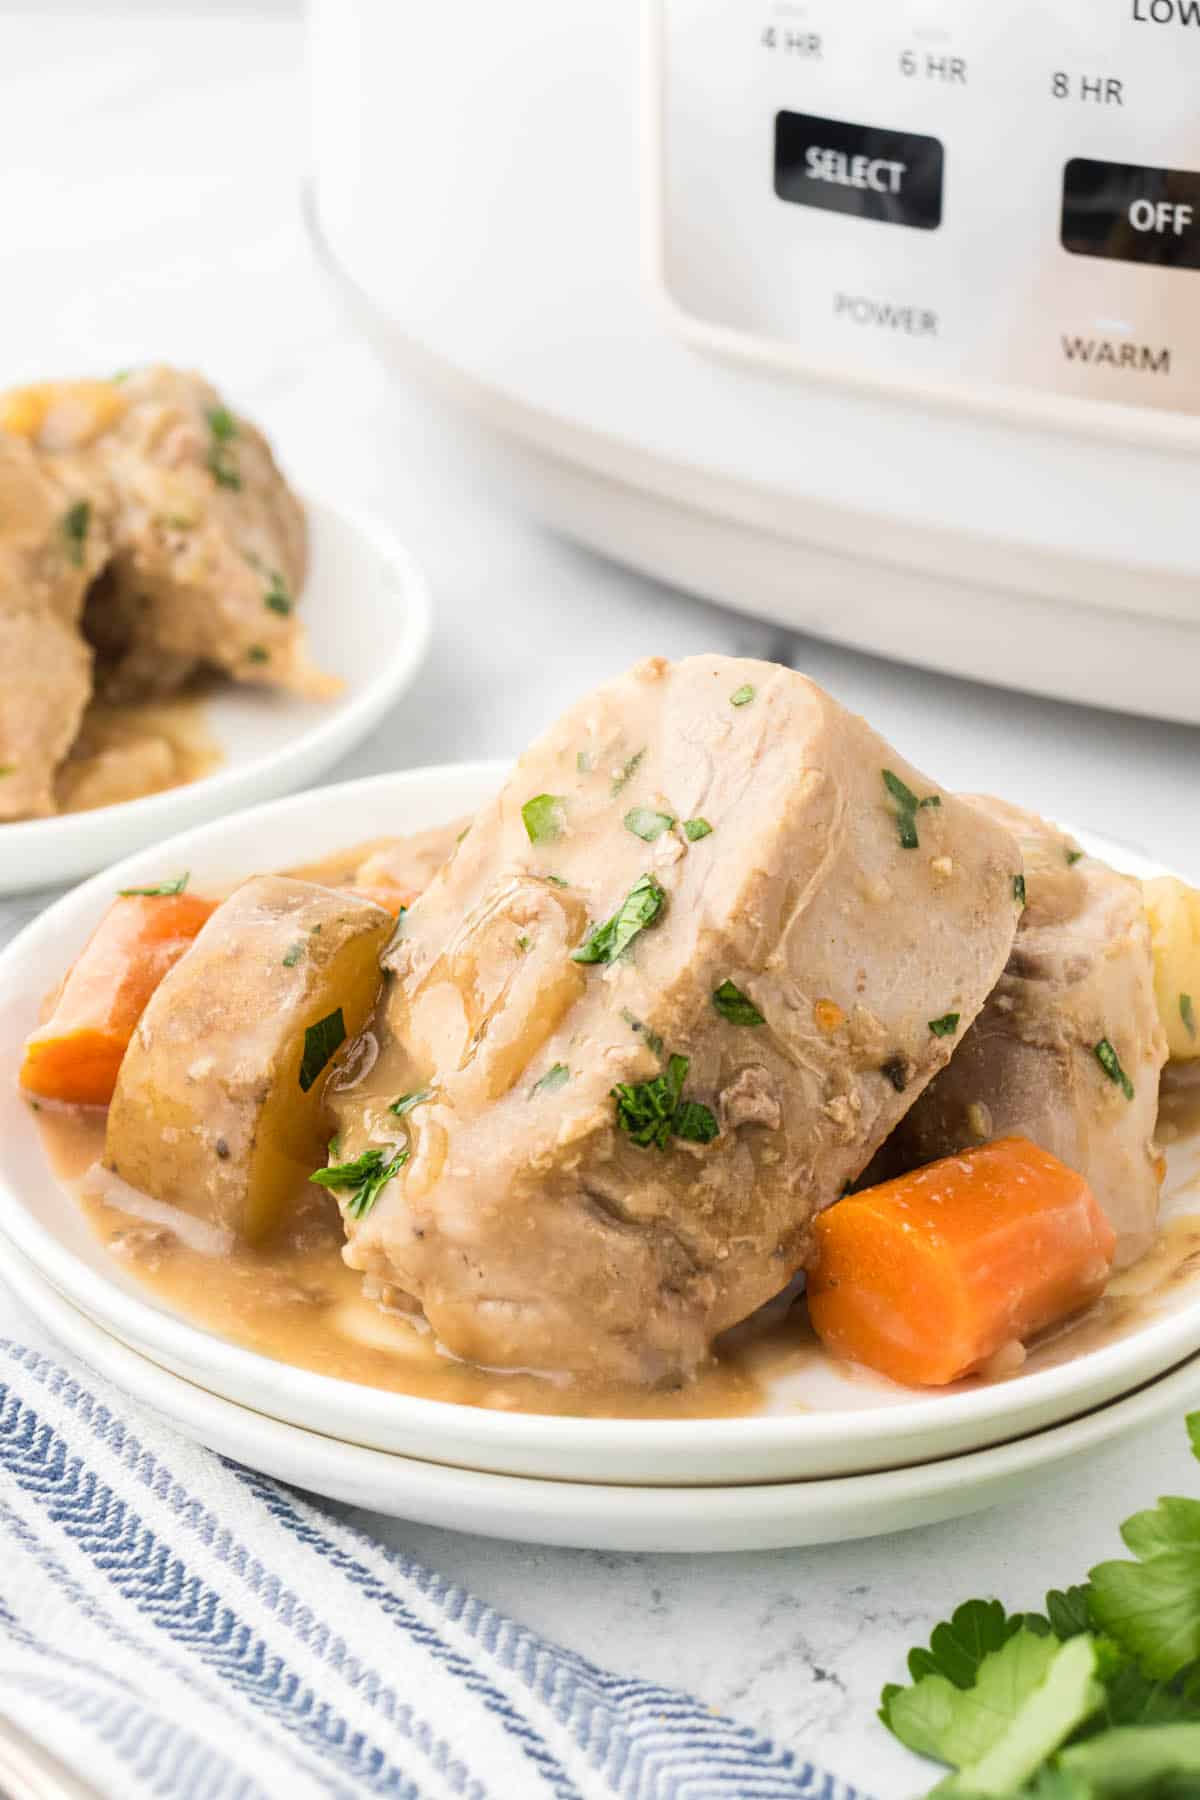 A plate with sliced pork, potatoes and carrots topped with gravy in front of a slow cooker.